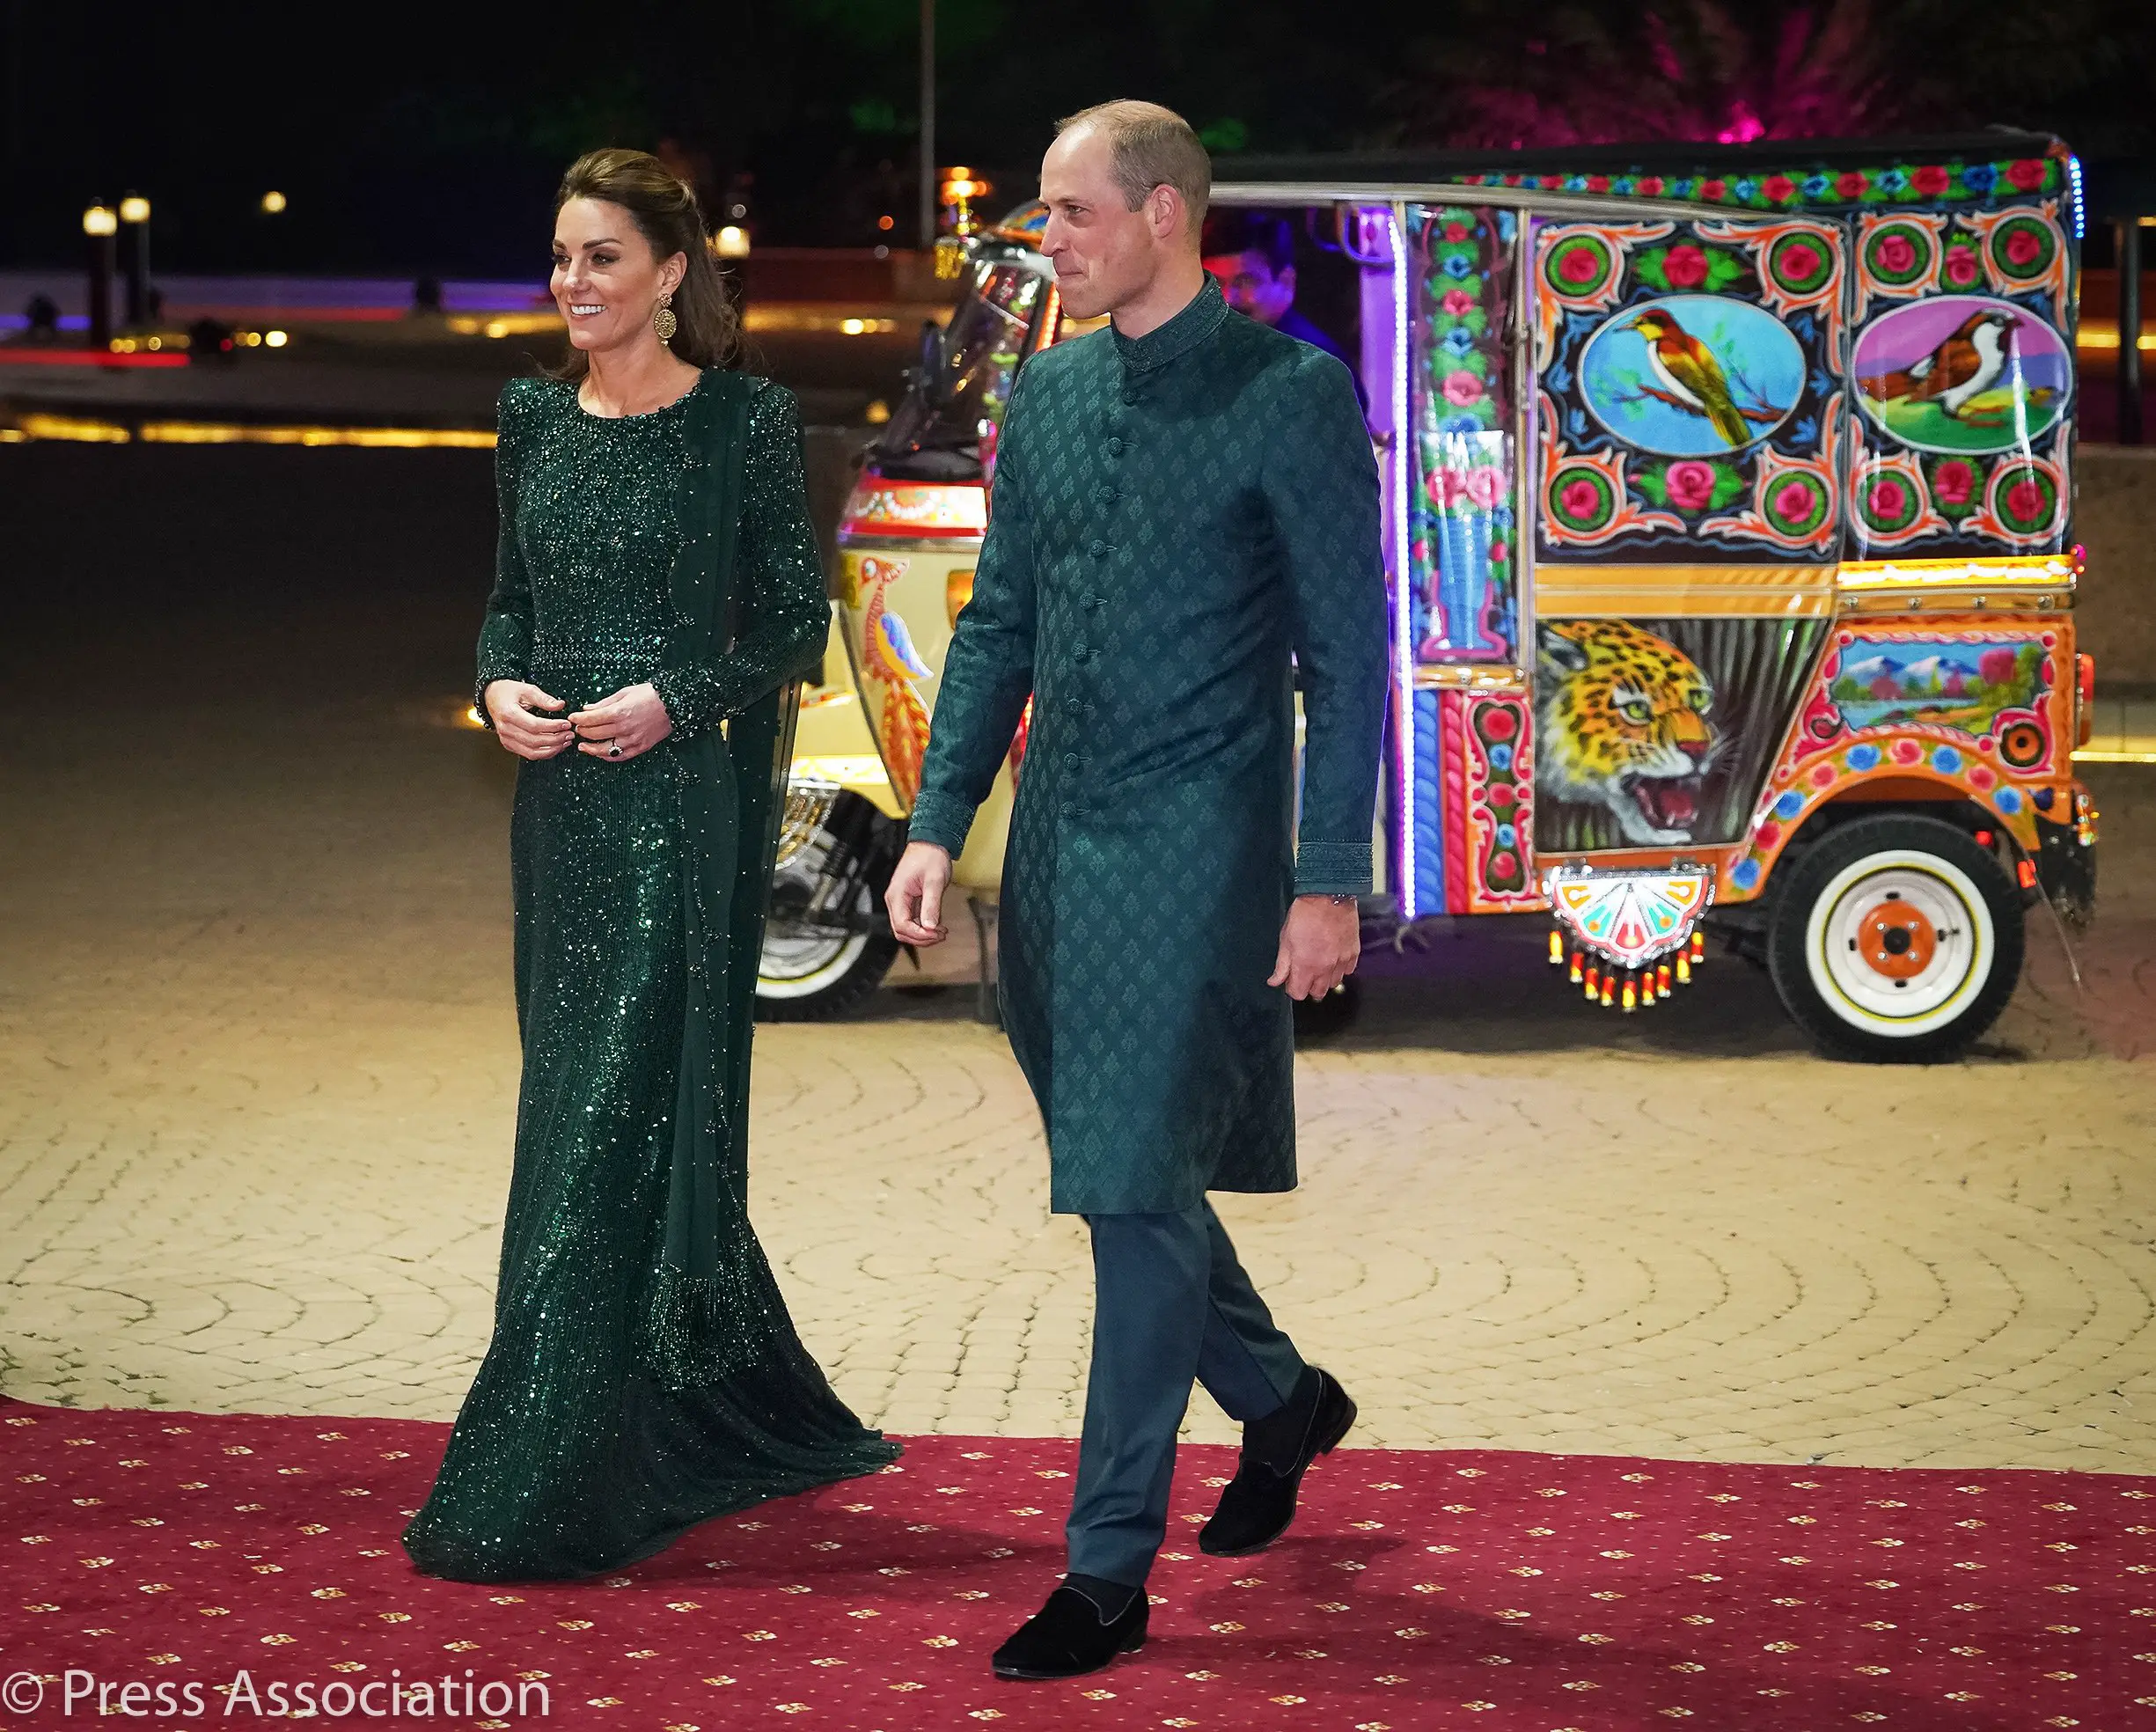 Duke and Duchess of Cambridge attended a reception hosted by British High Commissioner to Pakistan during Pakistan visit